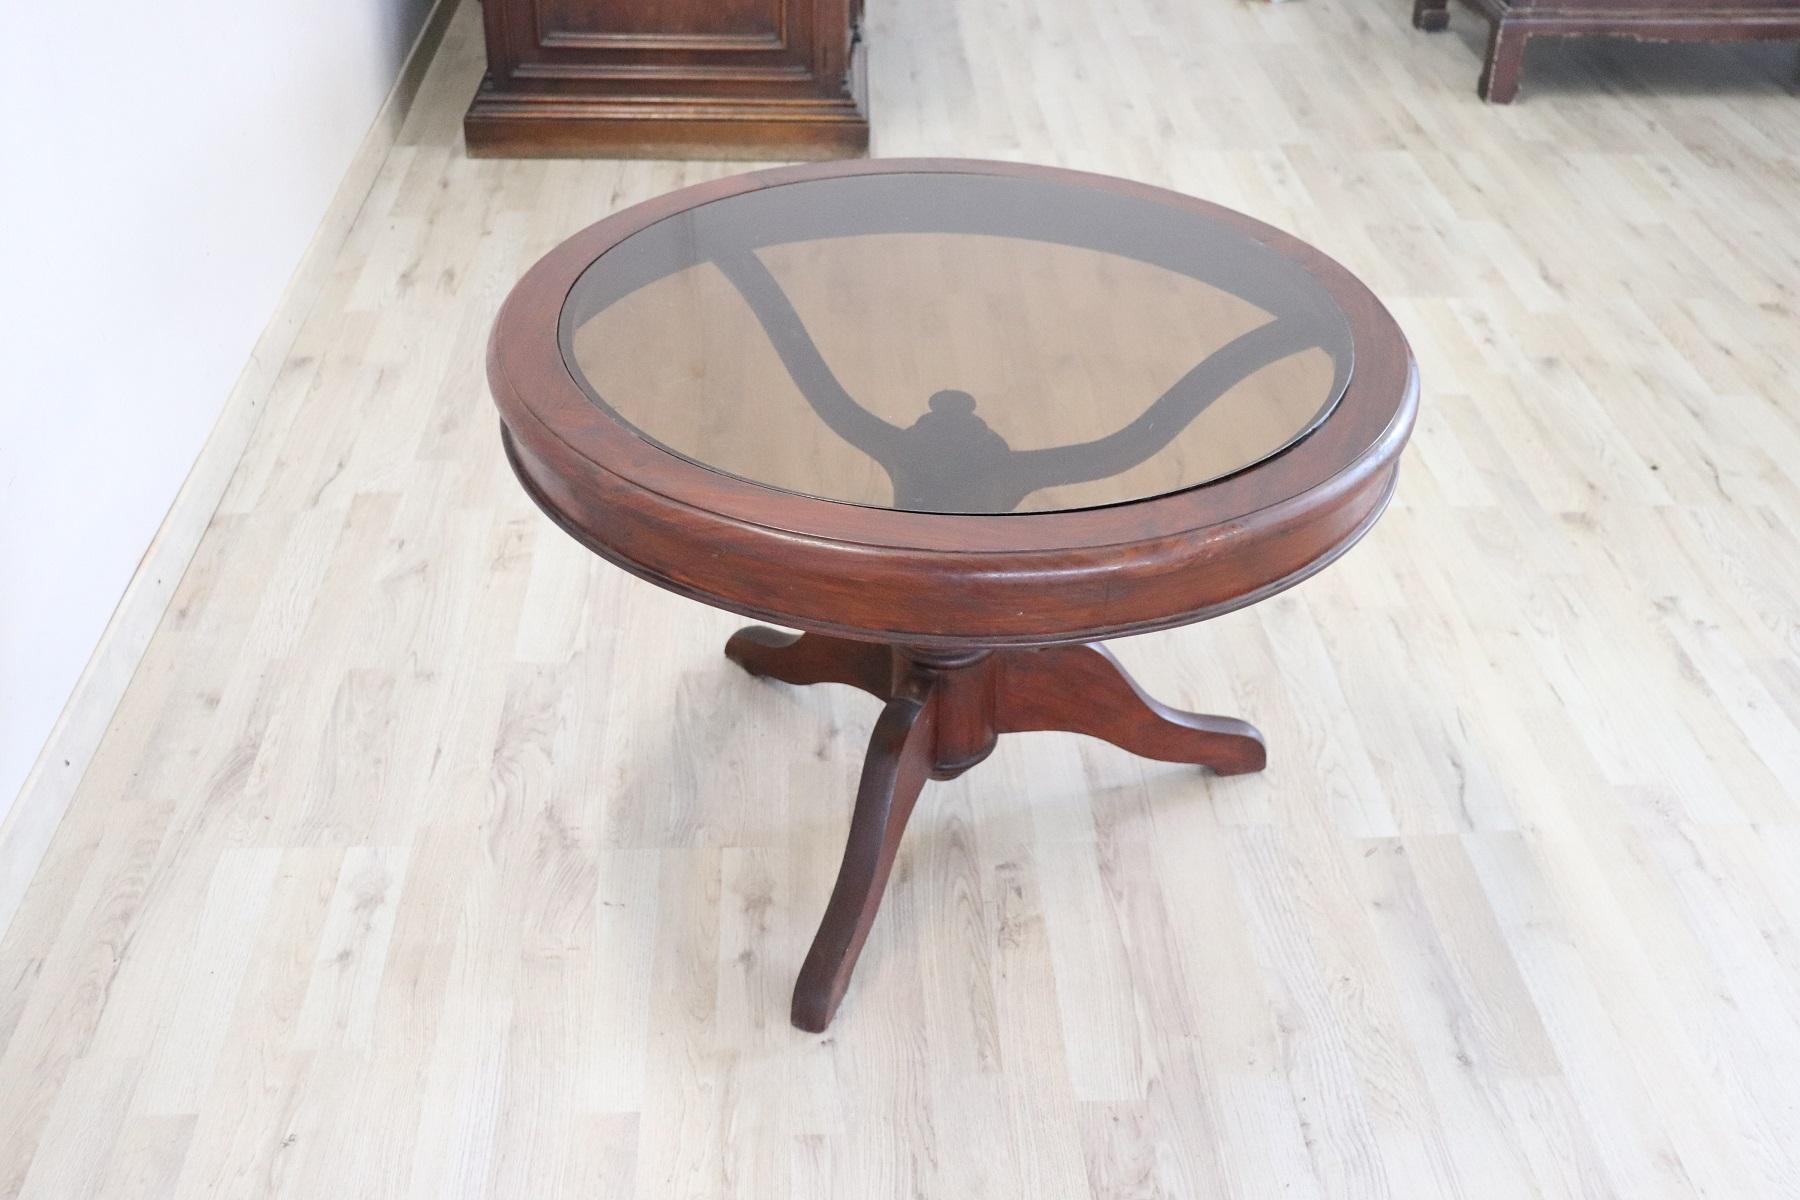 19th Century Italian Mahogany Round Coffee Table or Sofa Table with Glass Top 3